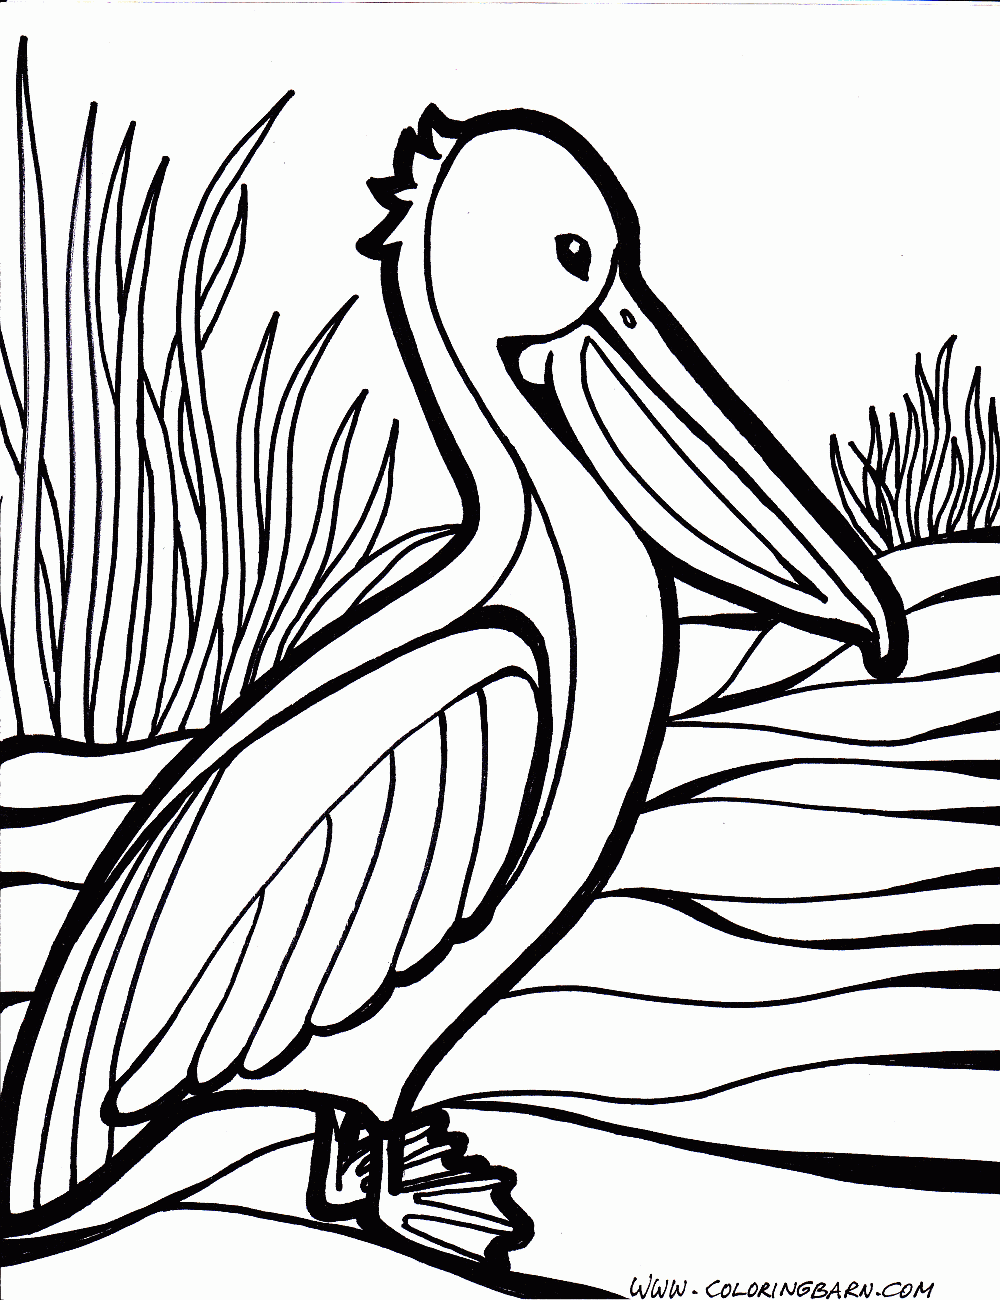 Pin by Anne on Drawing | Bird coloring pages, Pelican art, Animal coloring  pages